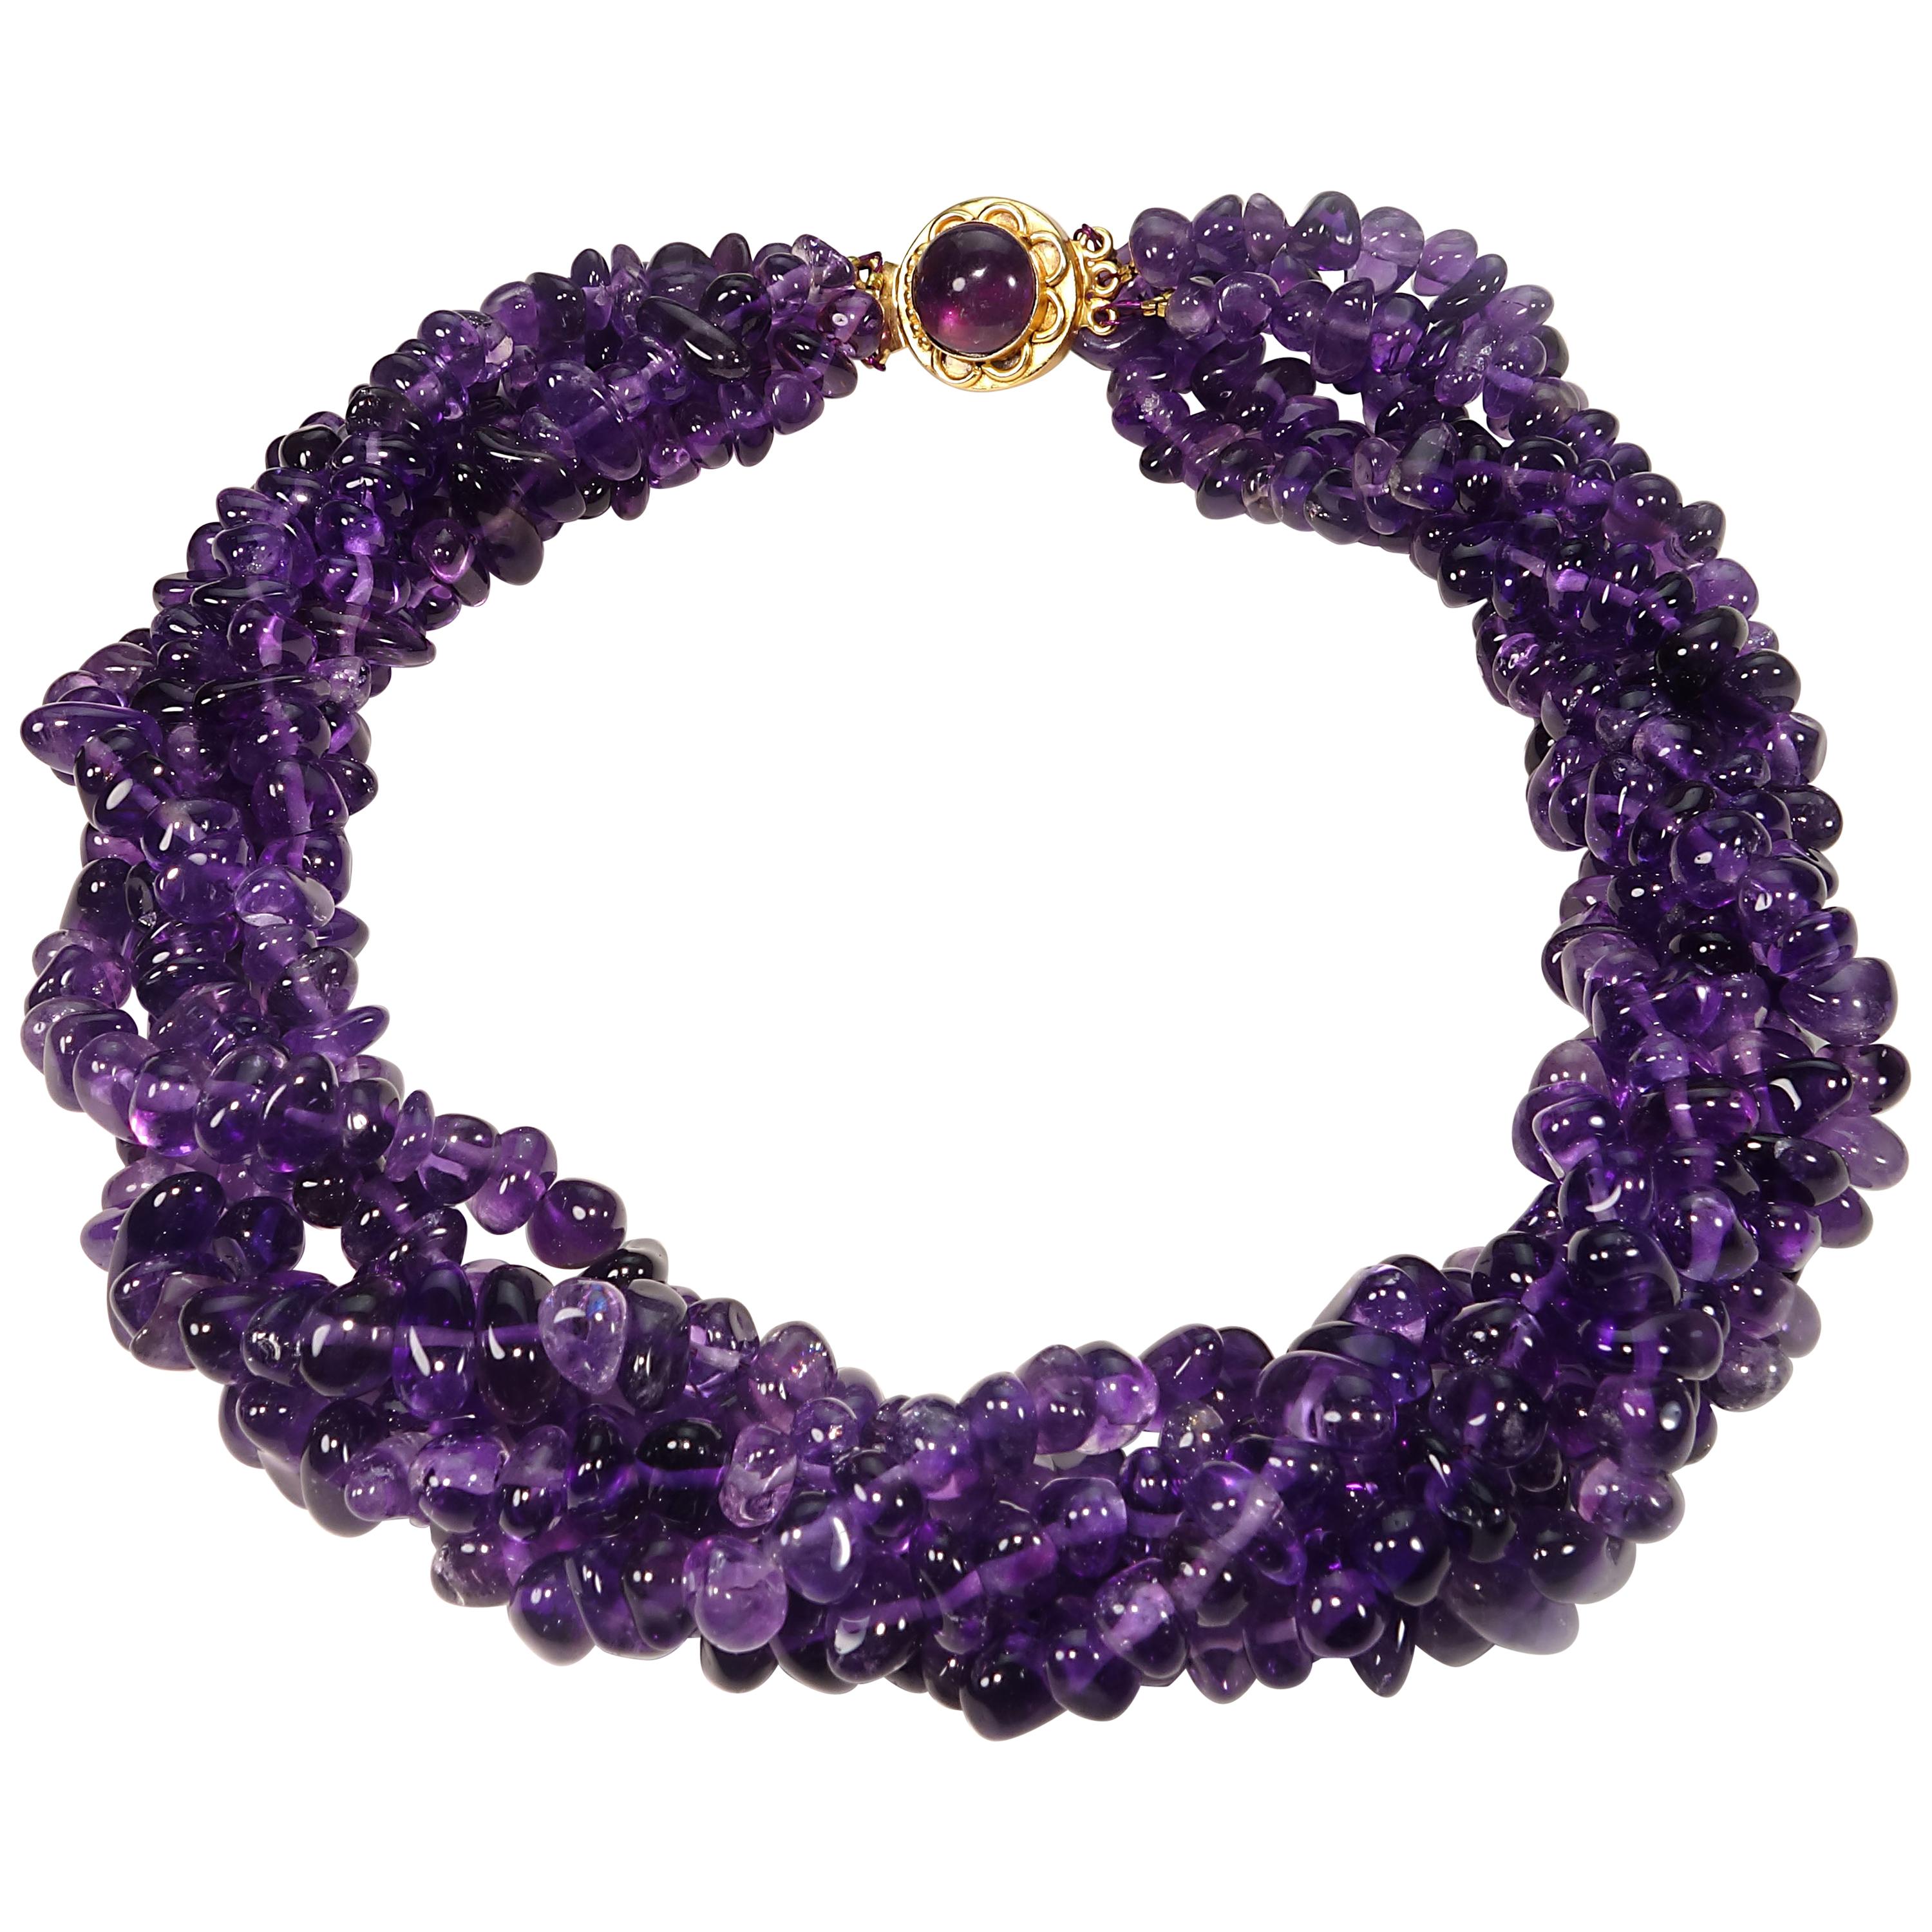 Five strands of custom made, highly polished, tumbled Amethyst, approximately 4-6mm,   in a stunning bright purple necklace.  The necklace can be twisted to shorten to choker length.  This unique necklace is secured with a gold tone box clasp with